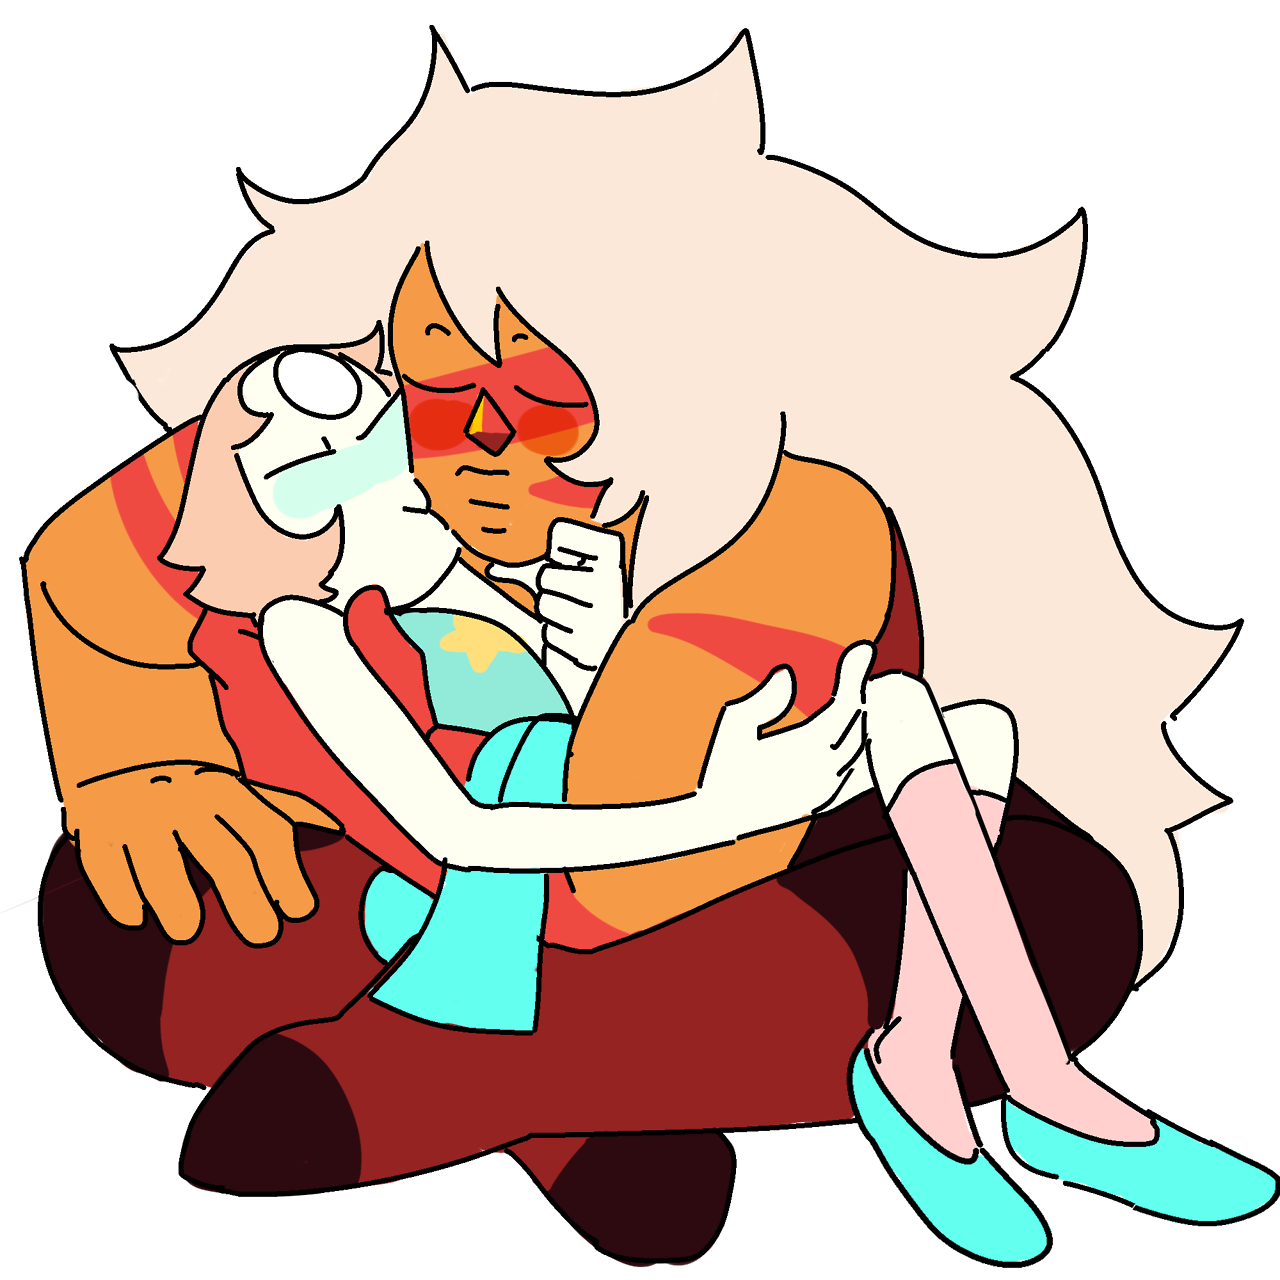 96864100. 96864138. but Jasper and Pearl are the most similar. 